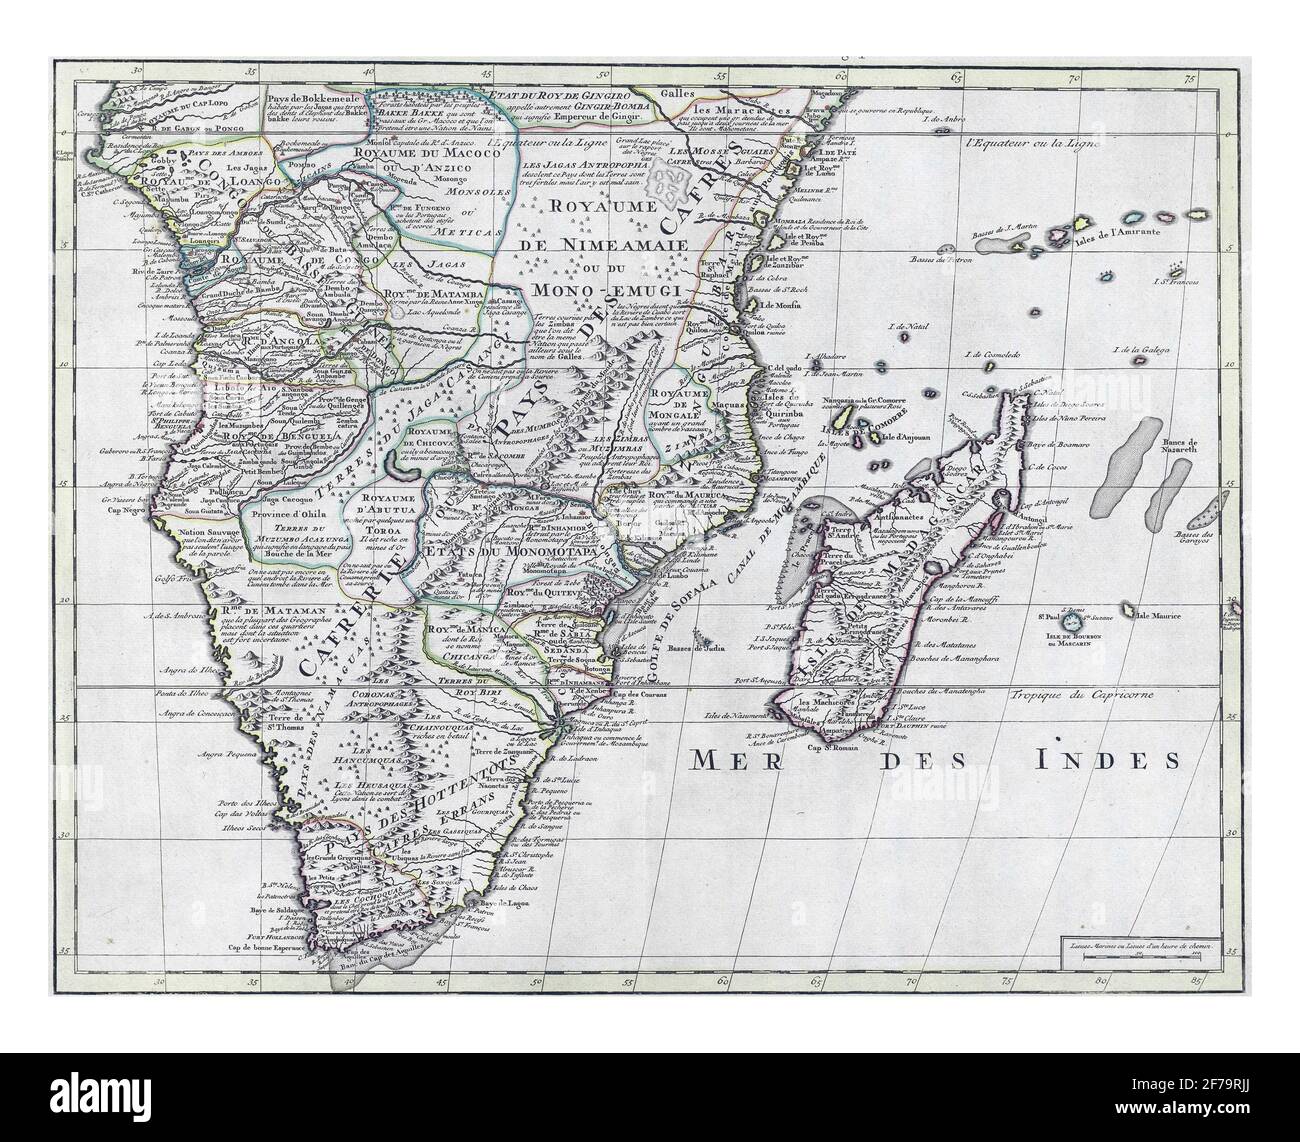 Map of South Africa and Madagascar, vintage engraving. Stock Photo